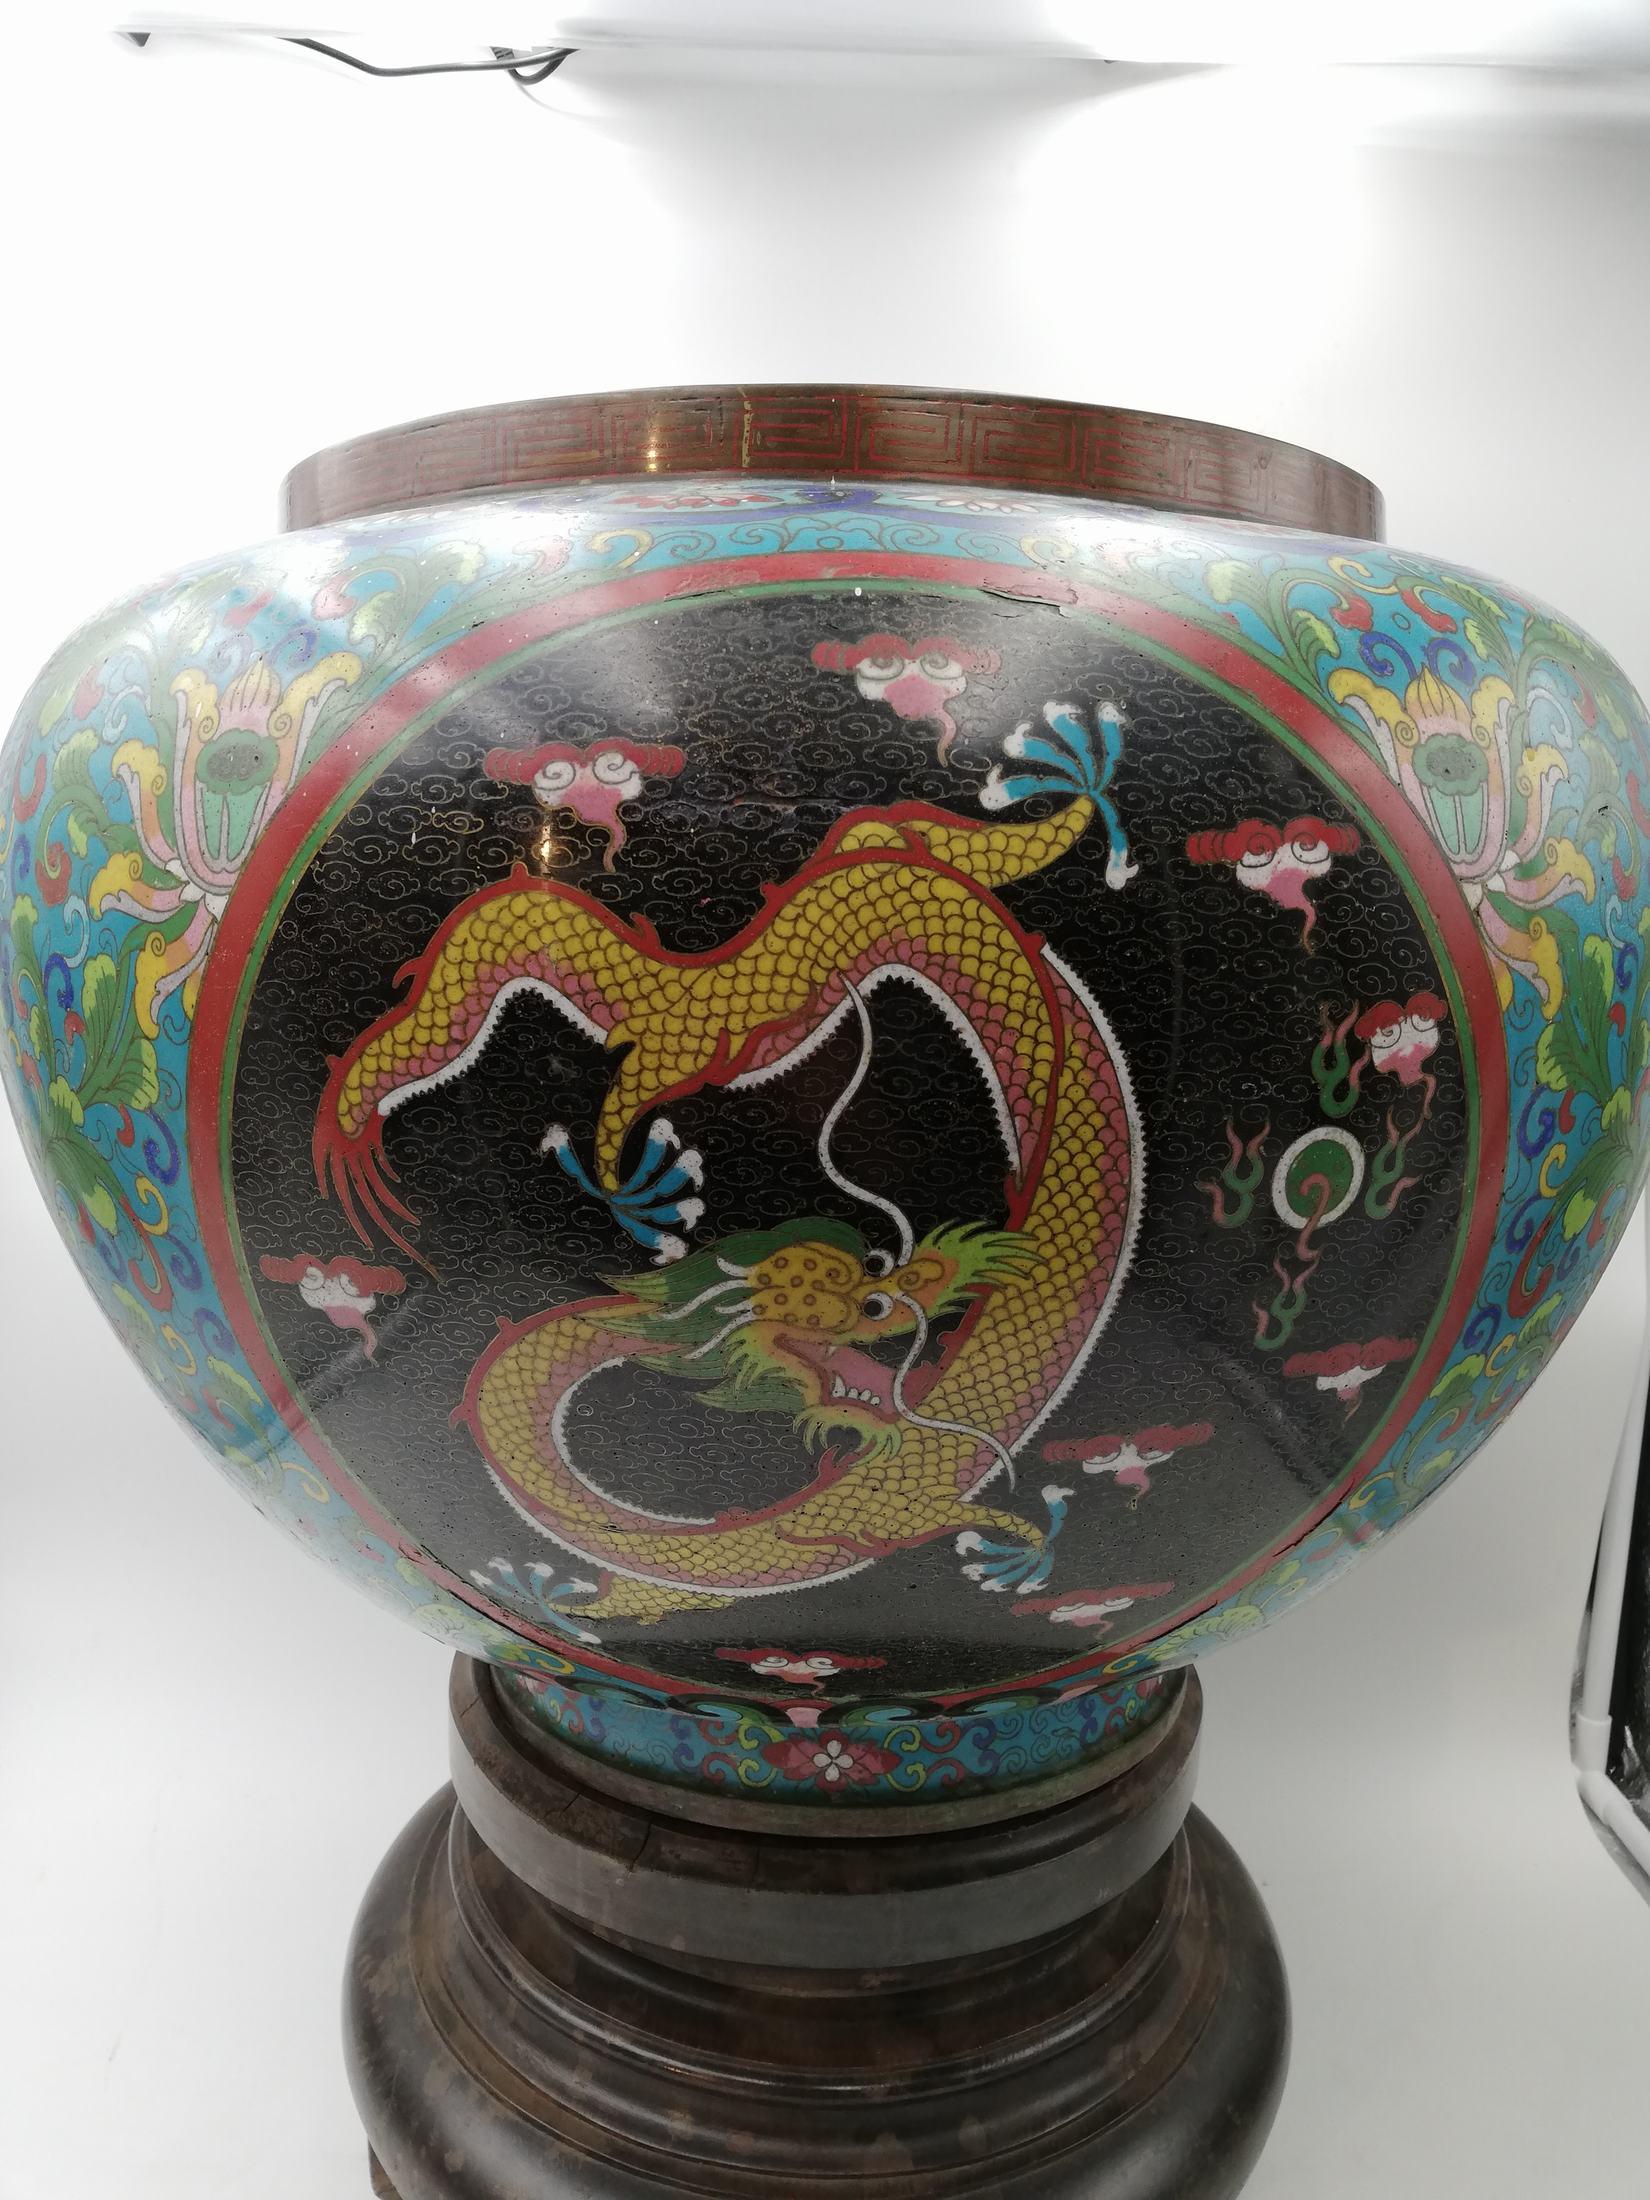 Chinese Spherical Vase Forming Planter Cloisonné Decorated with Polychrome Floral Motifs For Sale